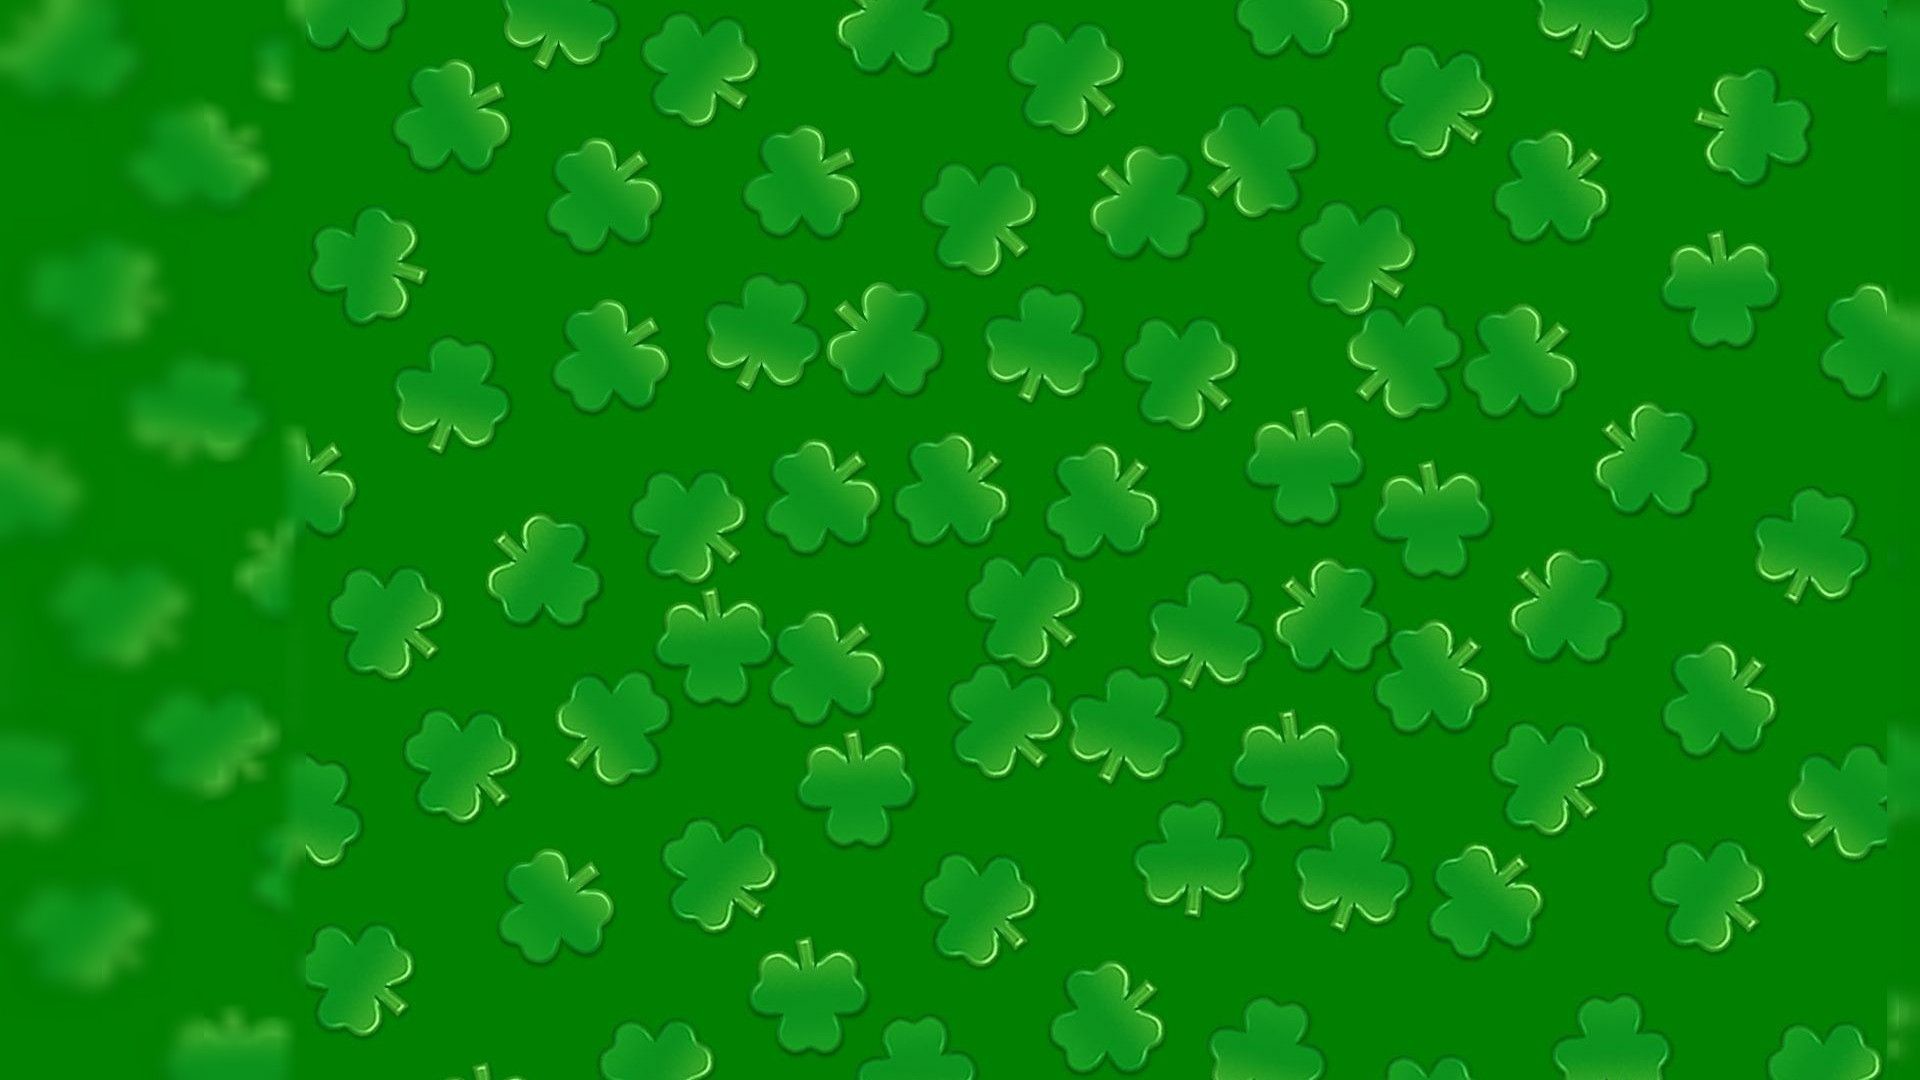 1920x1080 By Kyung Boon PC.28: St Patricks Day HD Images - HD Wallpapers